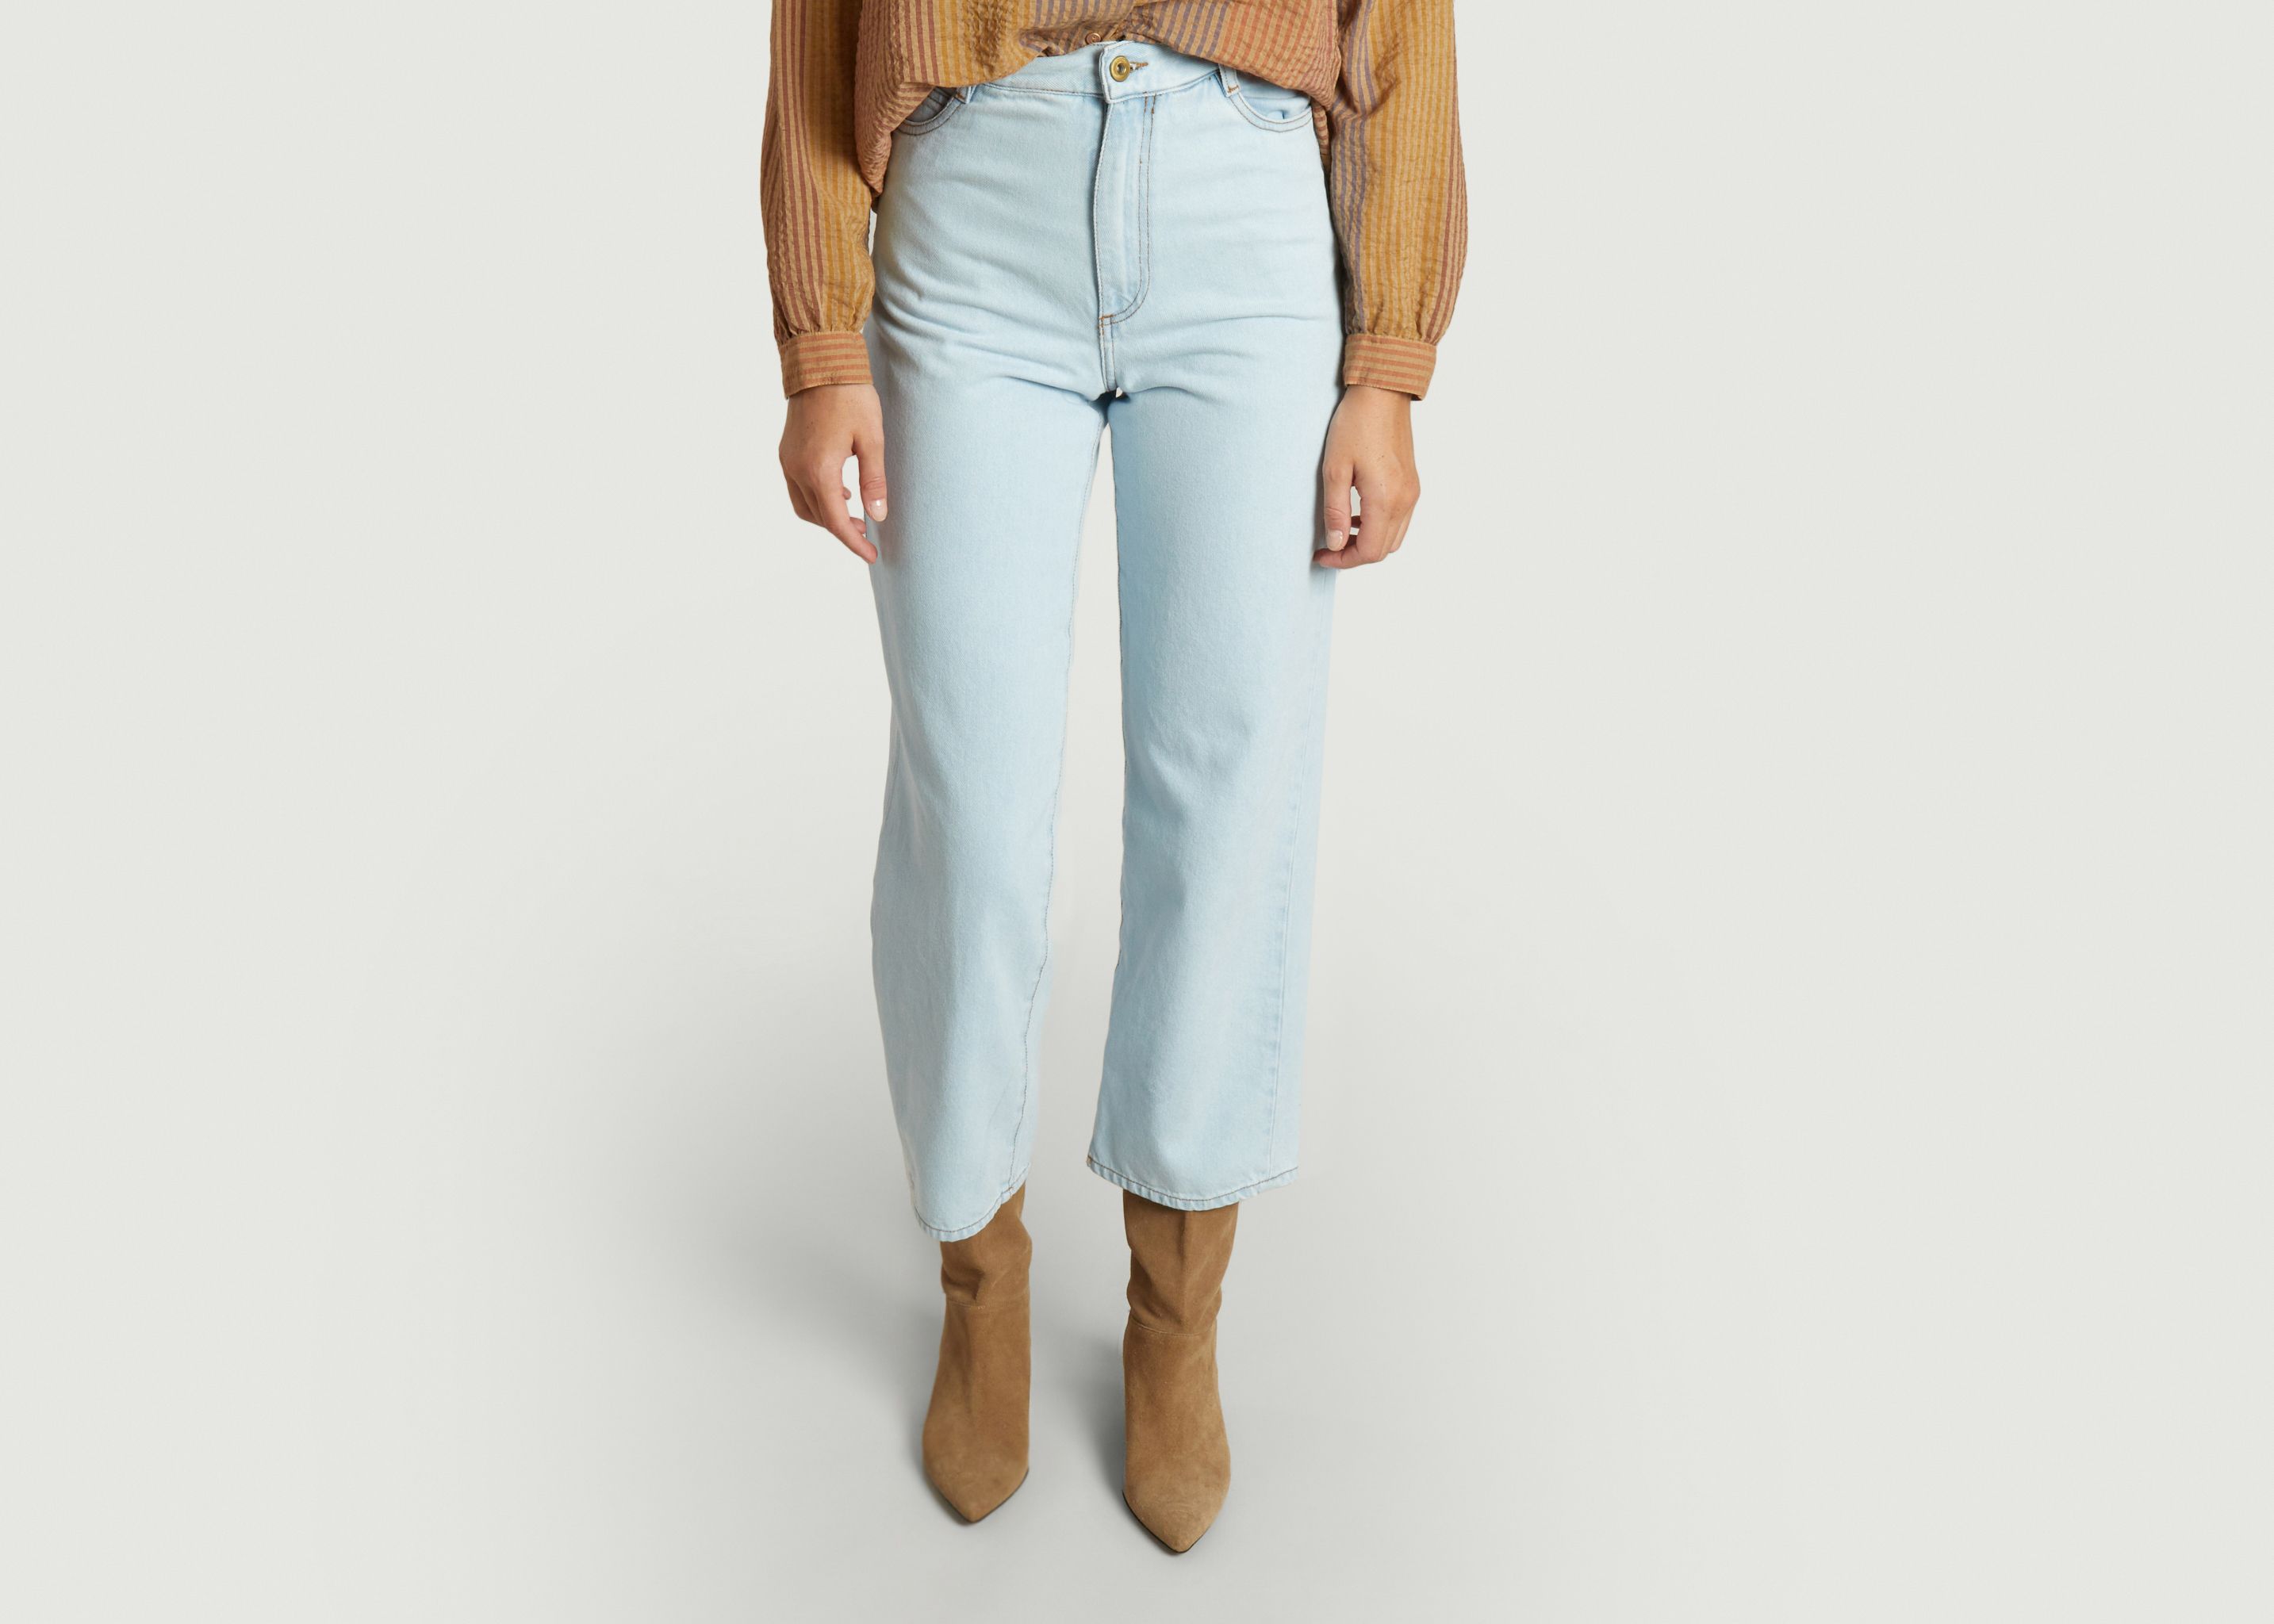 Bay Cruise jeans - Sessun